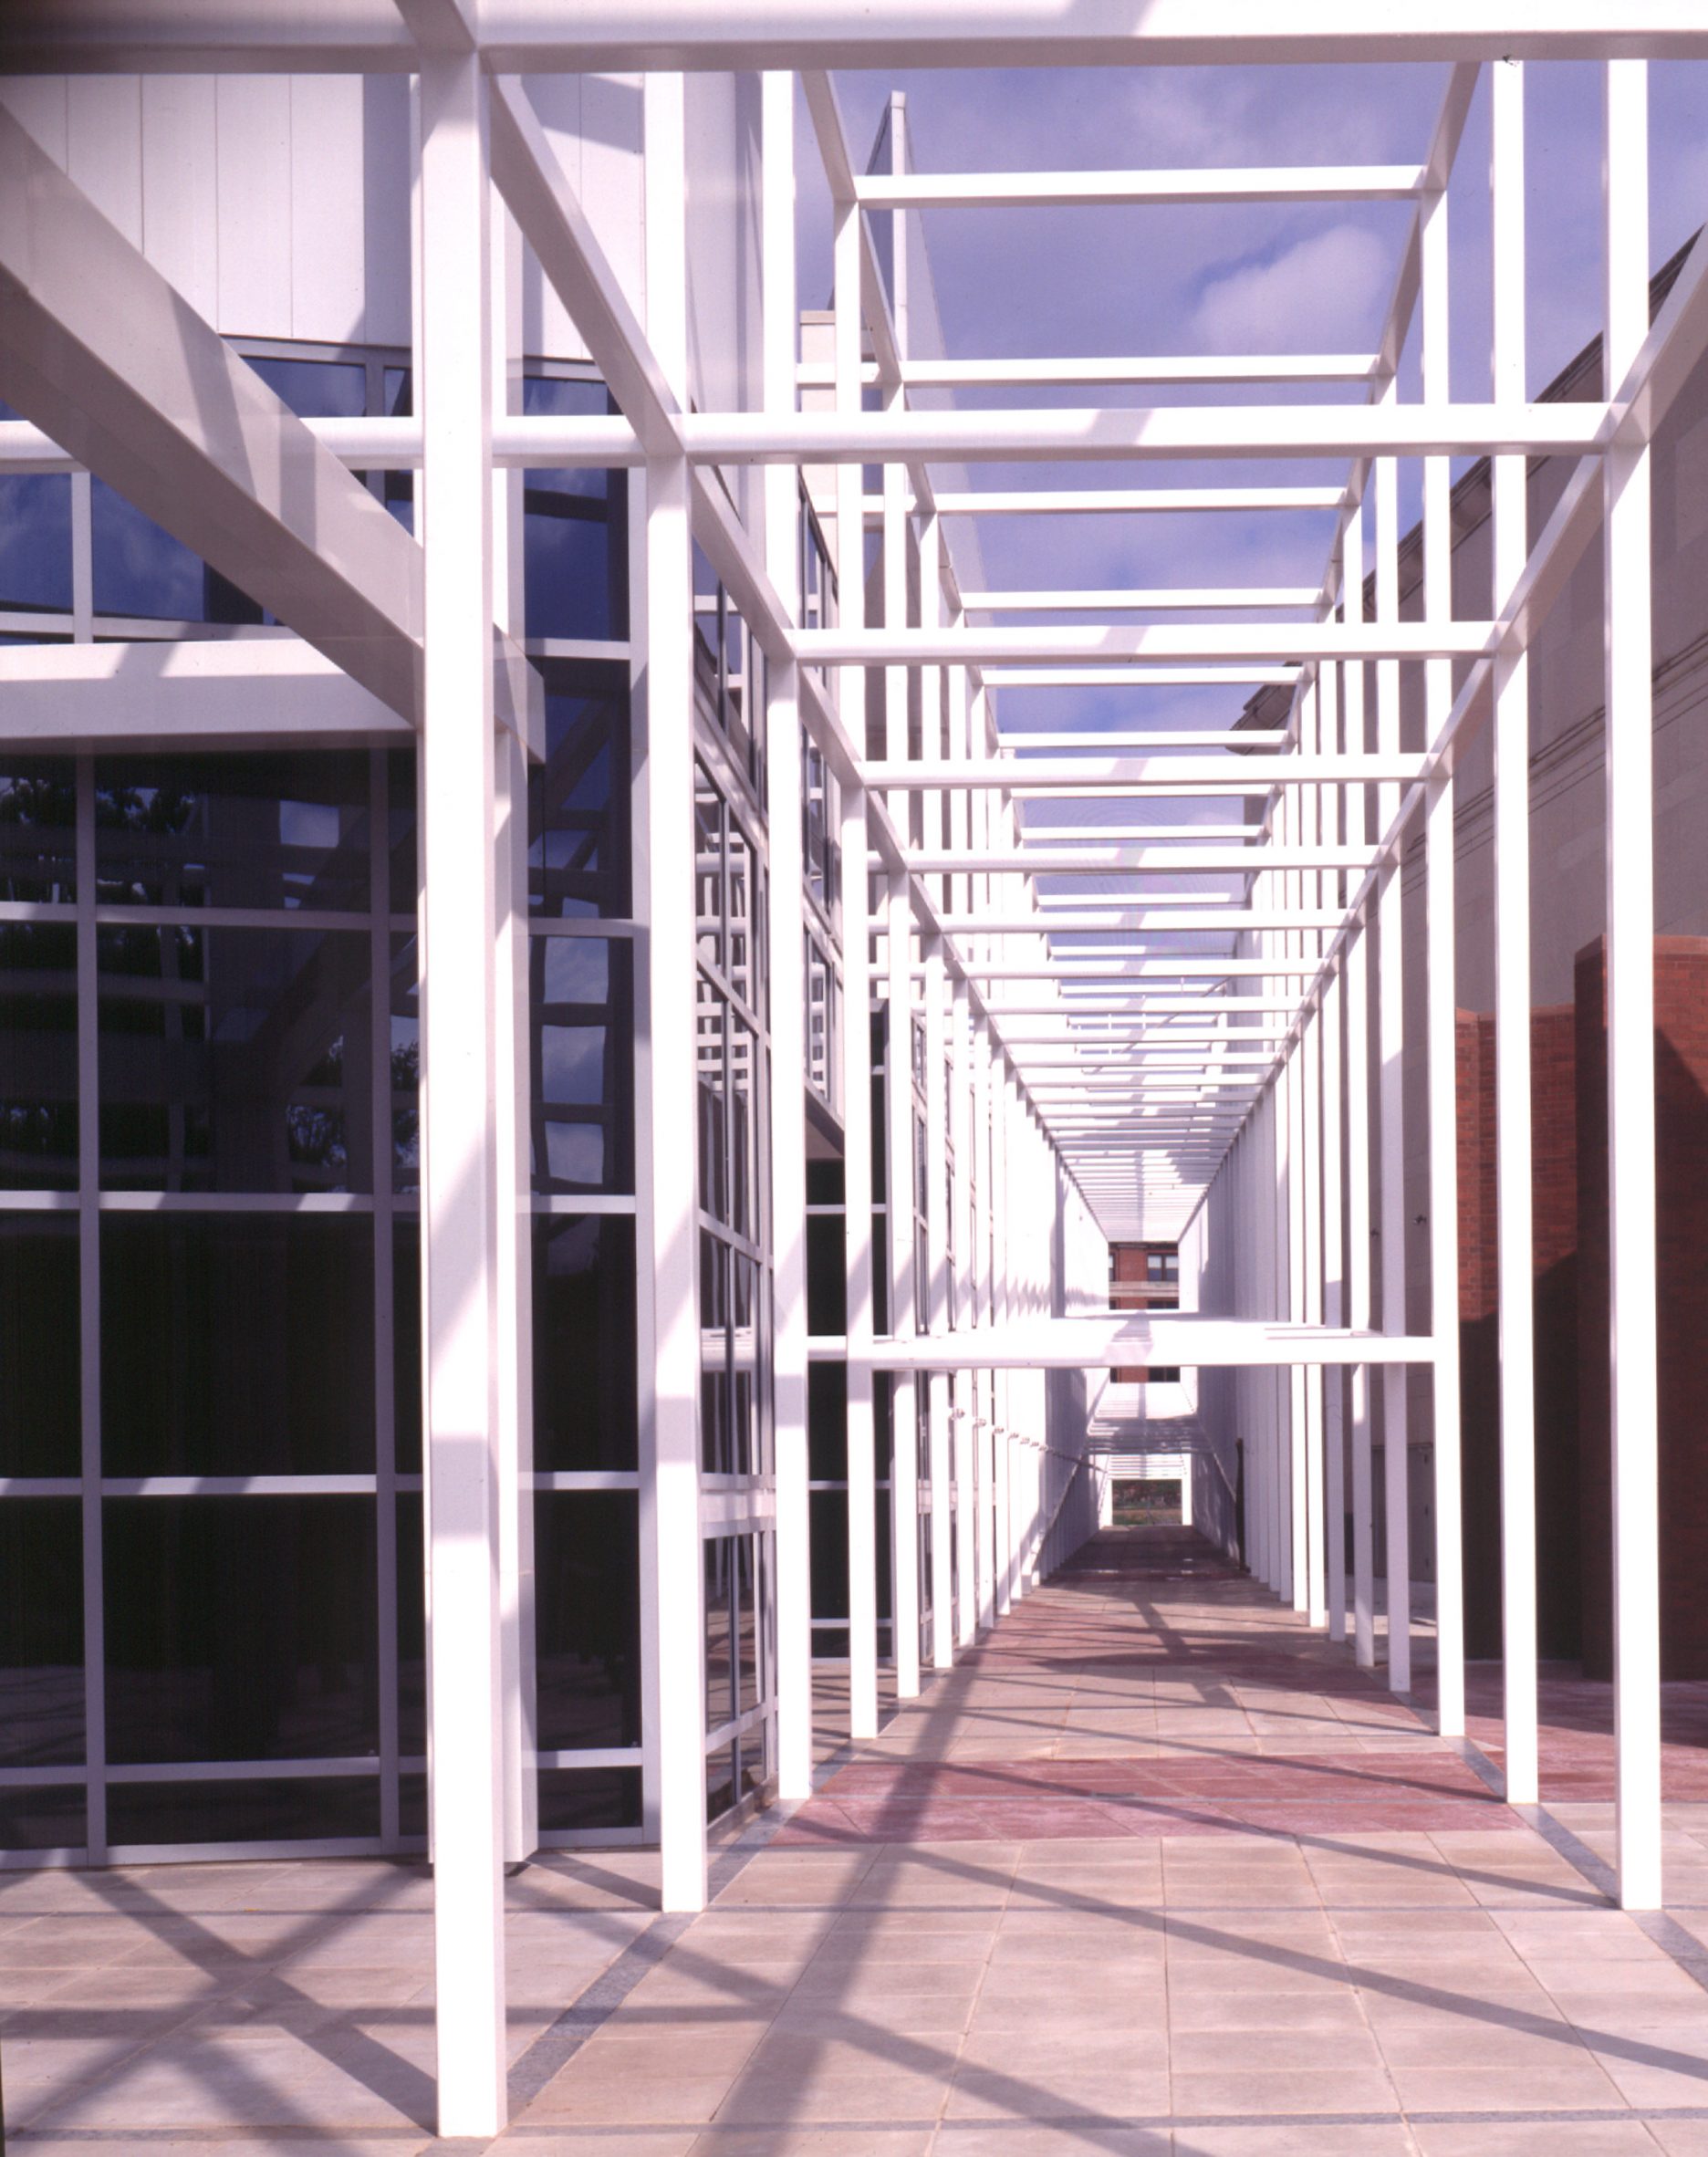 Image of the steel covered walkway at Wexner Center for the Arts